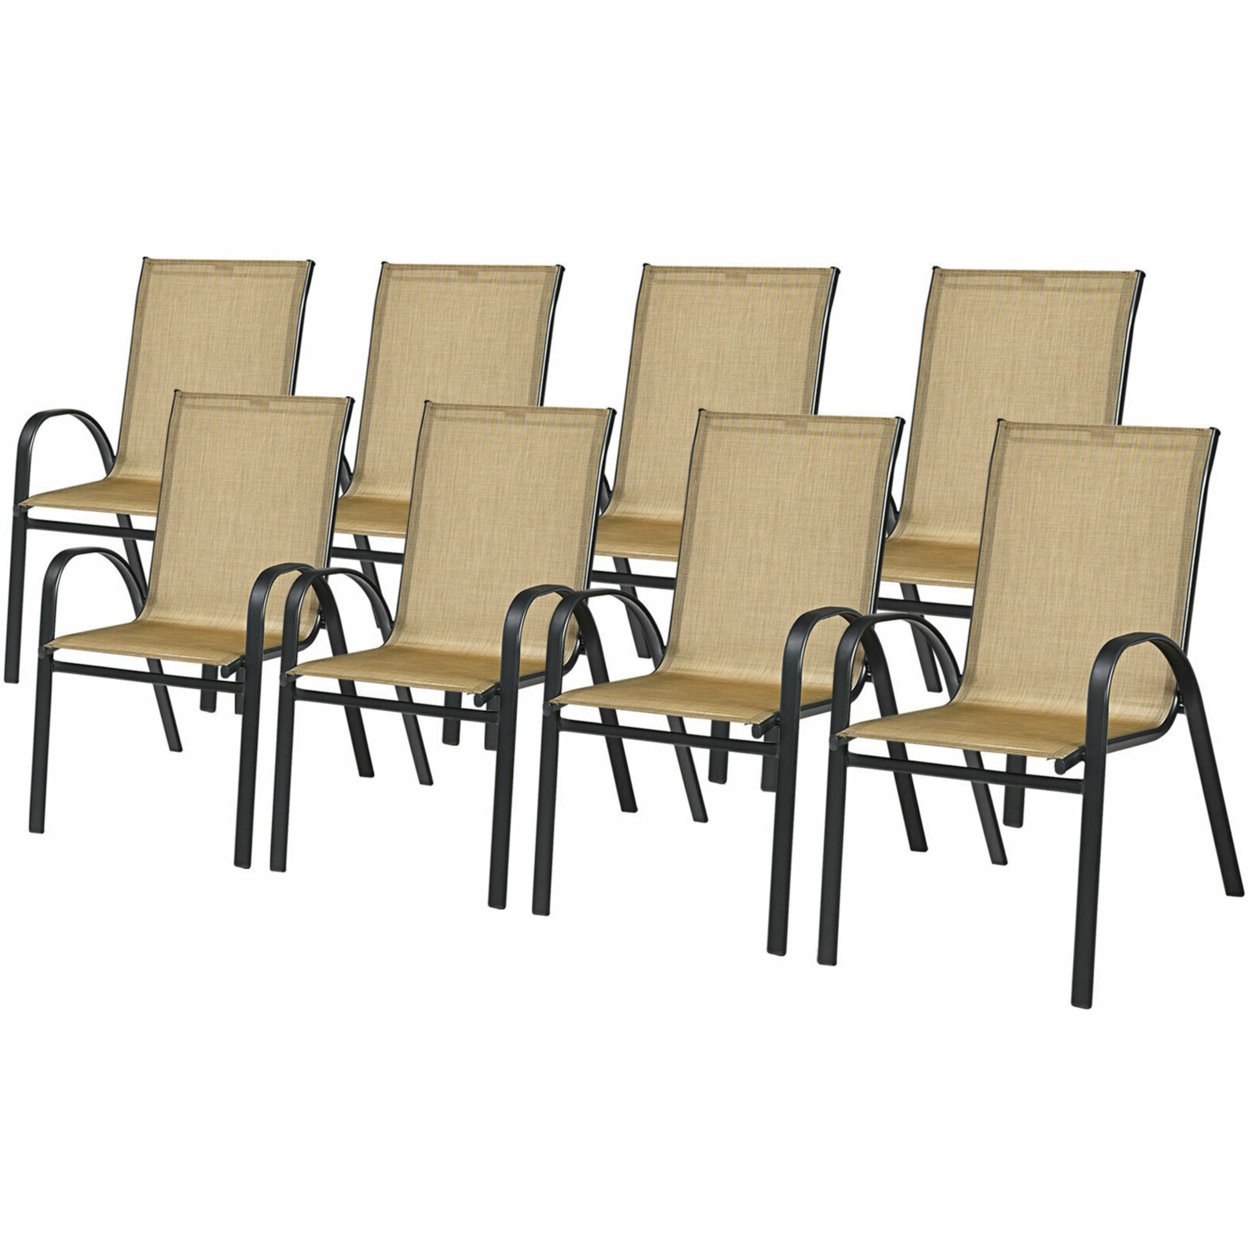 Gymax Patio Dining Chair Outdoor Stackable Armchair W/ Breathable Fabric - 8 Pcs